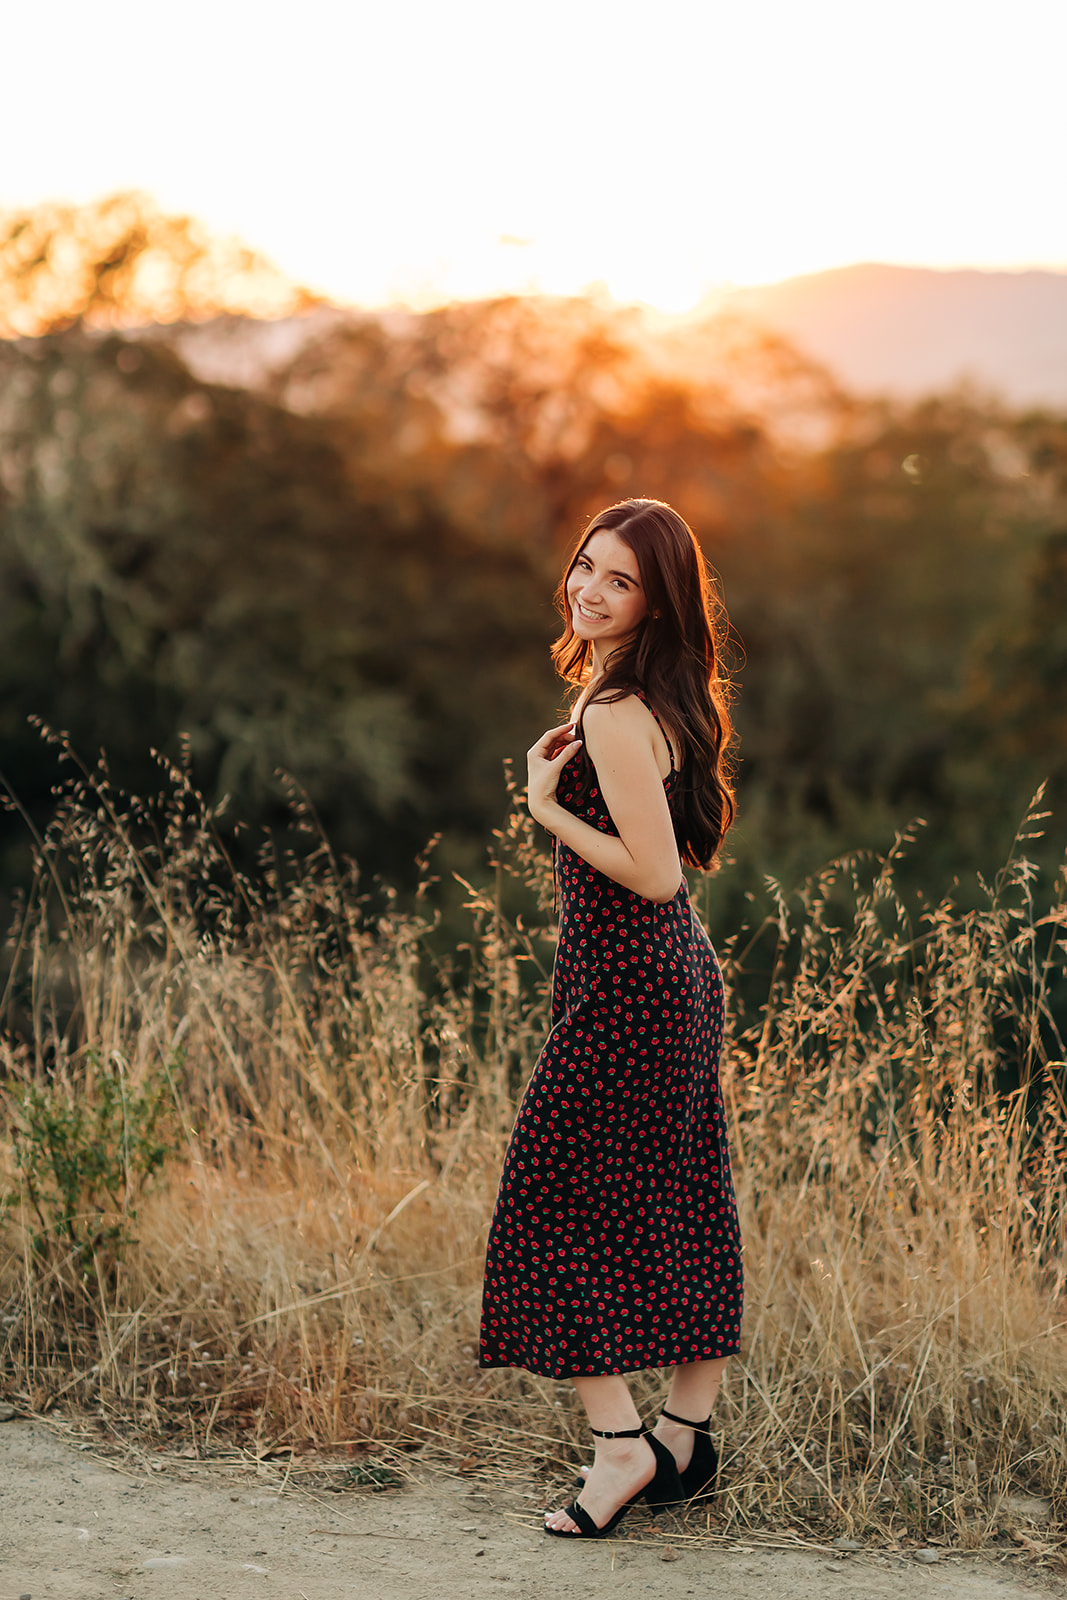 a girl standing in a field during sunset posing